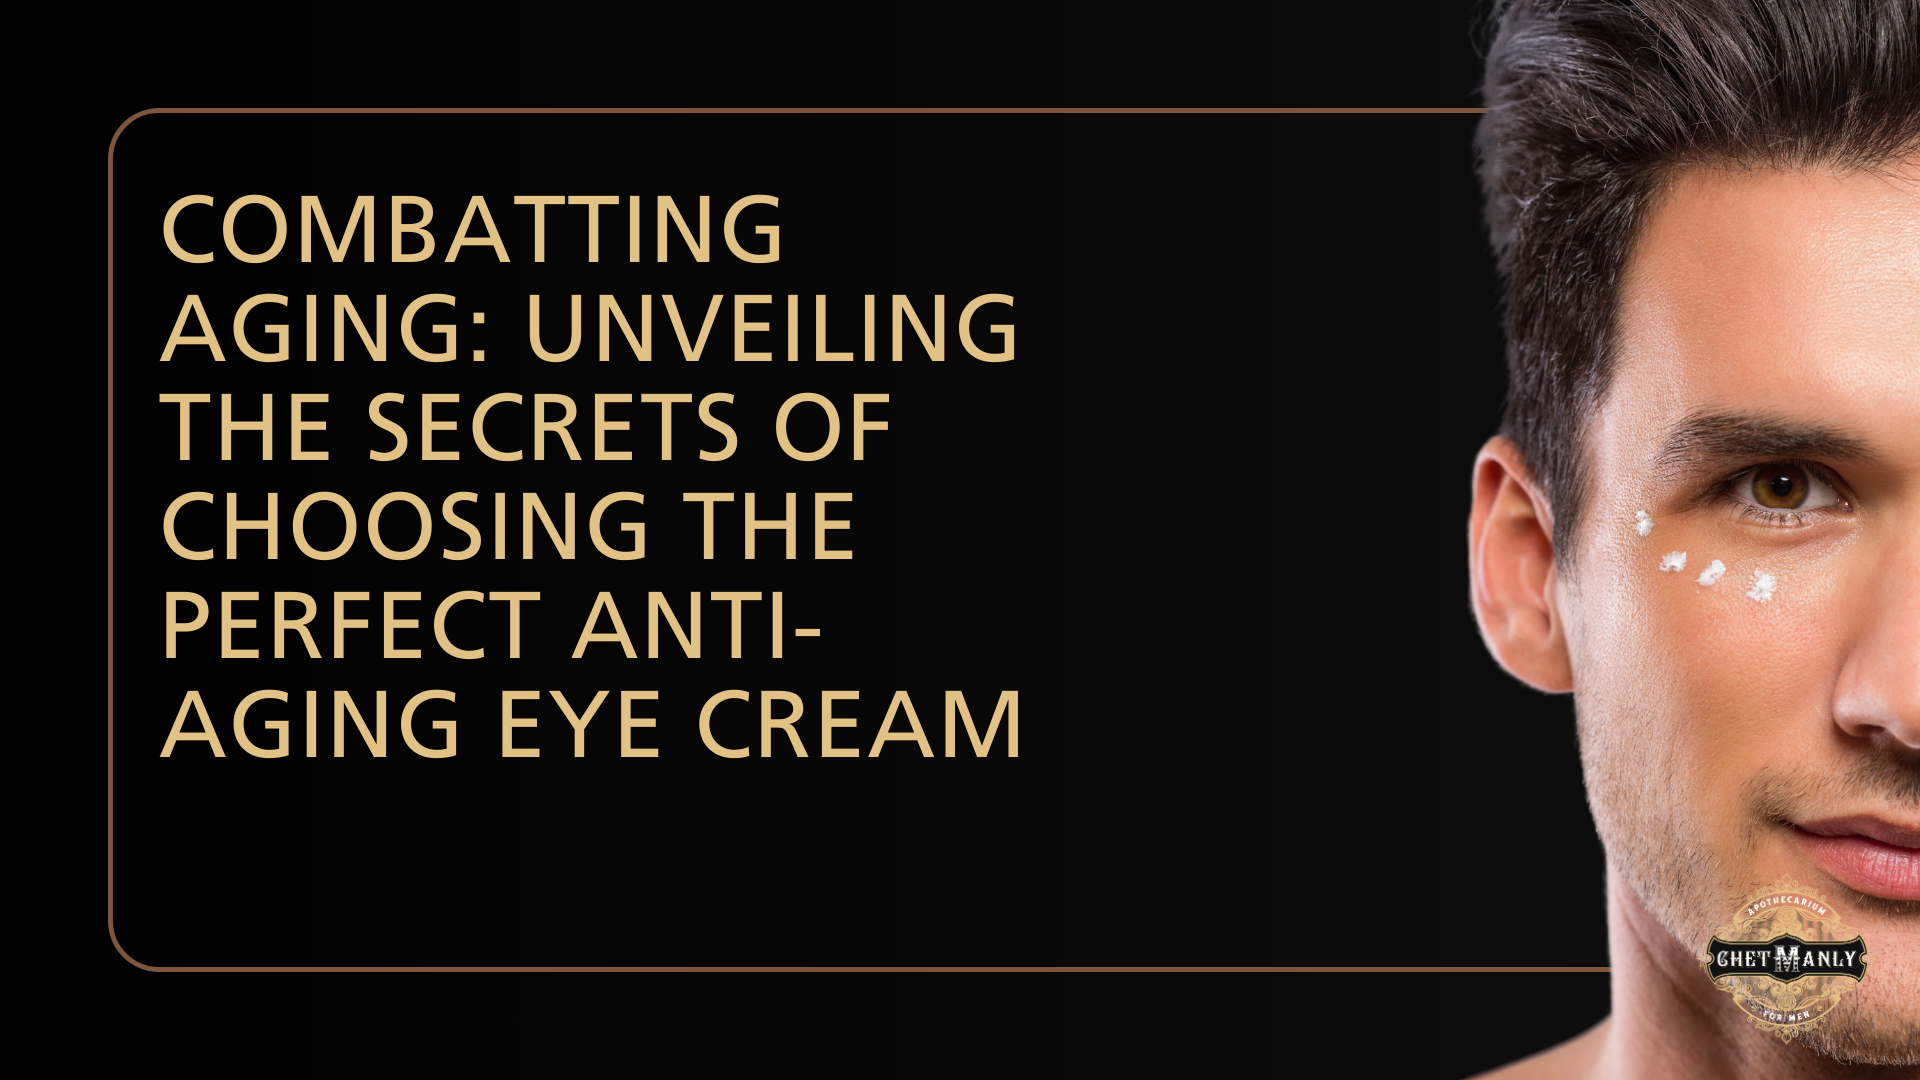 Combatting Aging: Unveiling the Secrets of Choosing the Perfect Anti-Aging Eye Cream